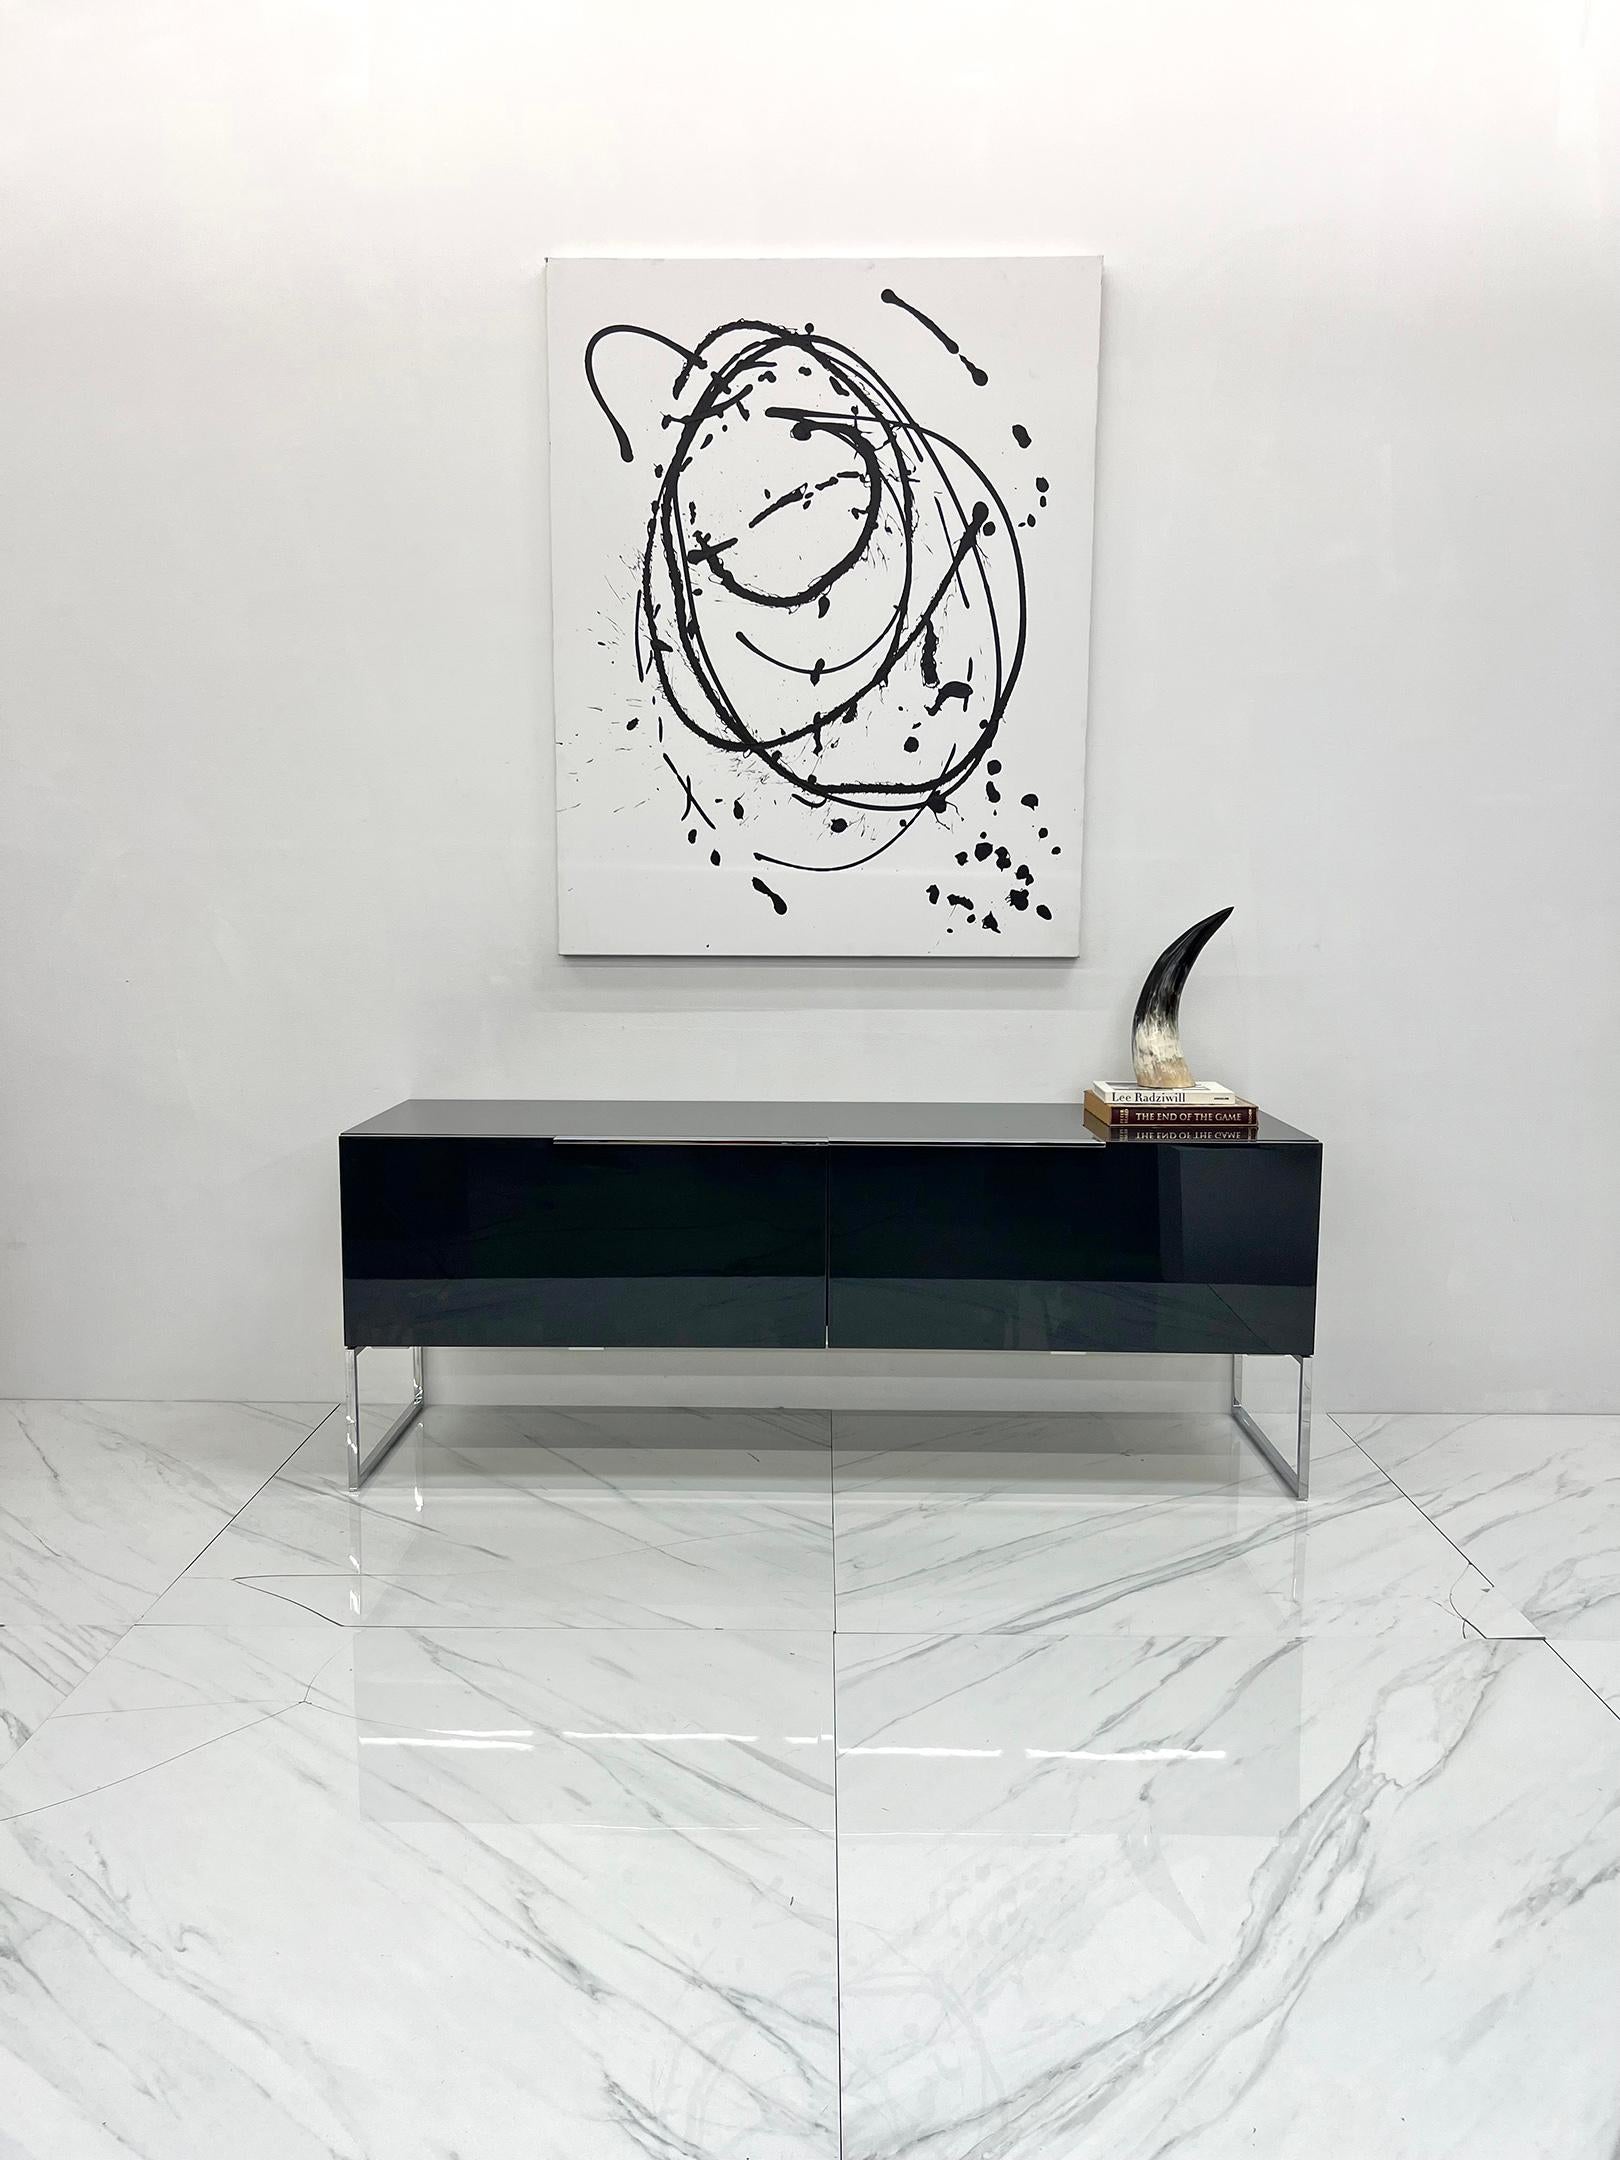 Available right now i have an Athos credenza by Paolo Piva for B&B Italia.

The credenza is a glossy dark grey lacquer with polished stainless legs and handles. The credenza has sliding doors and is finished on every side, so it can be floated in a